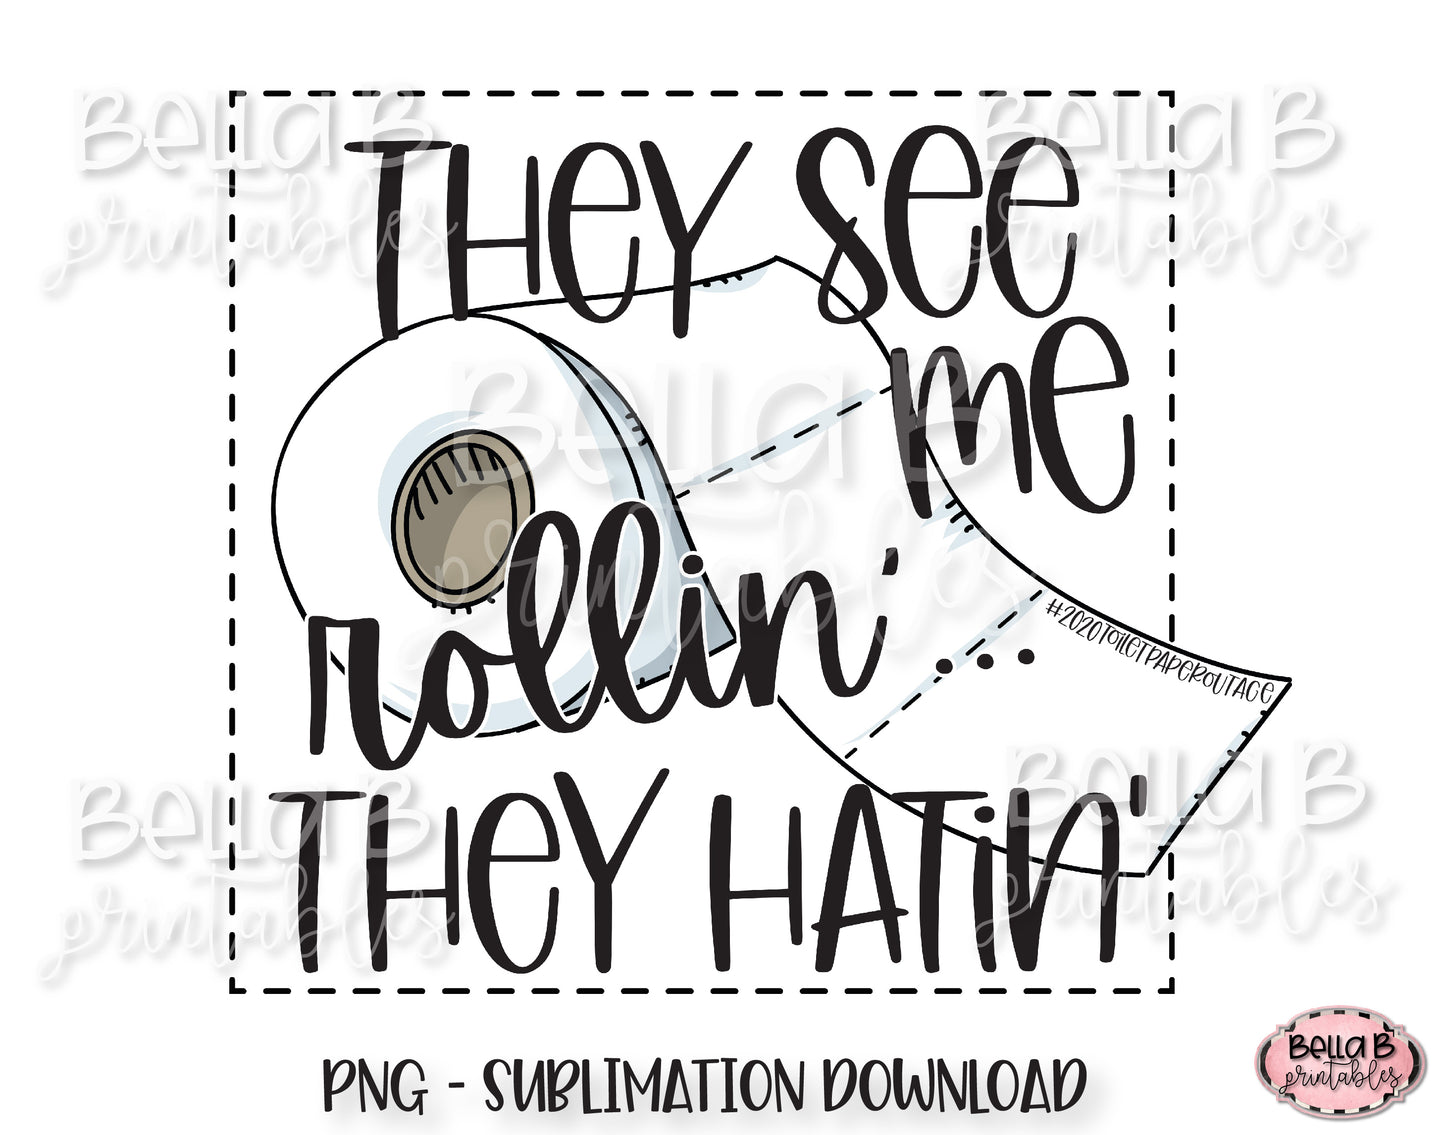 They See Me Rollin' They Hatin' Sublimation Design, 2020 Toilet Paper Outage Design